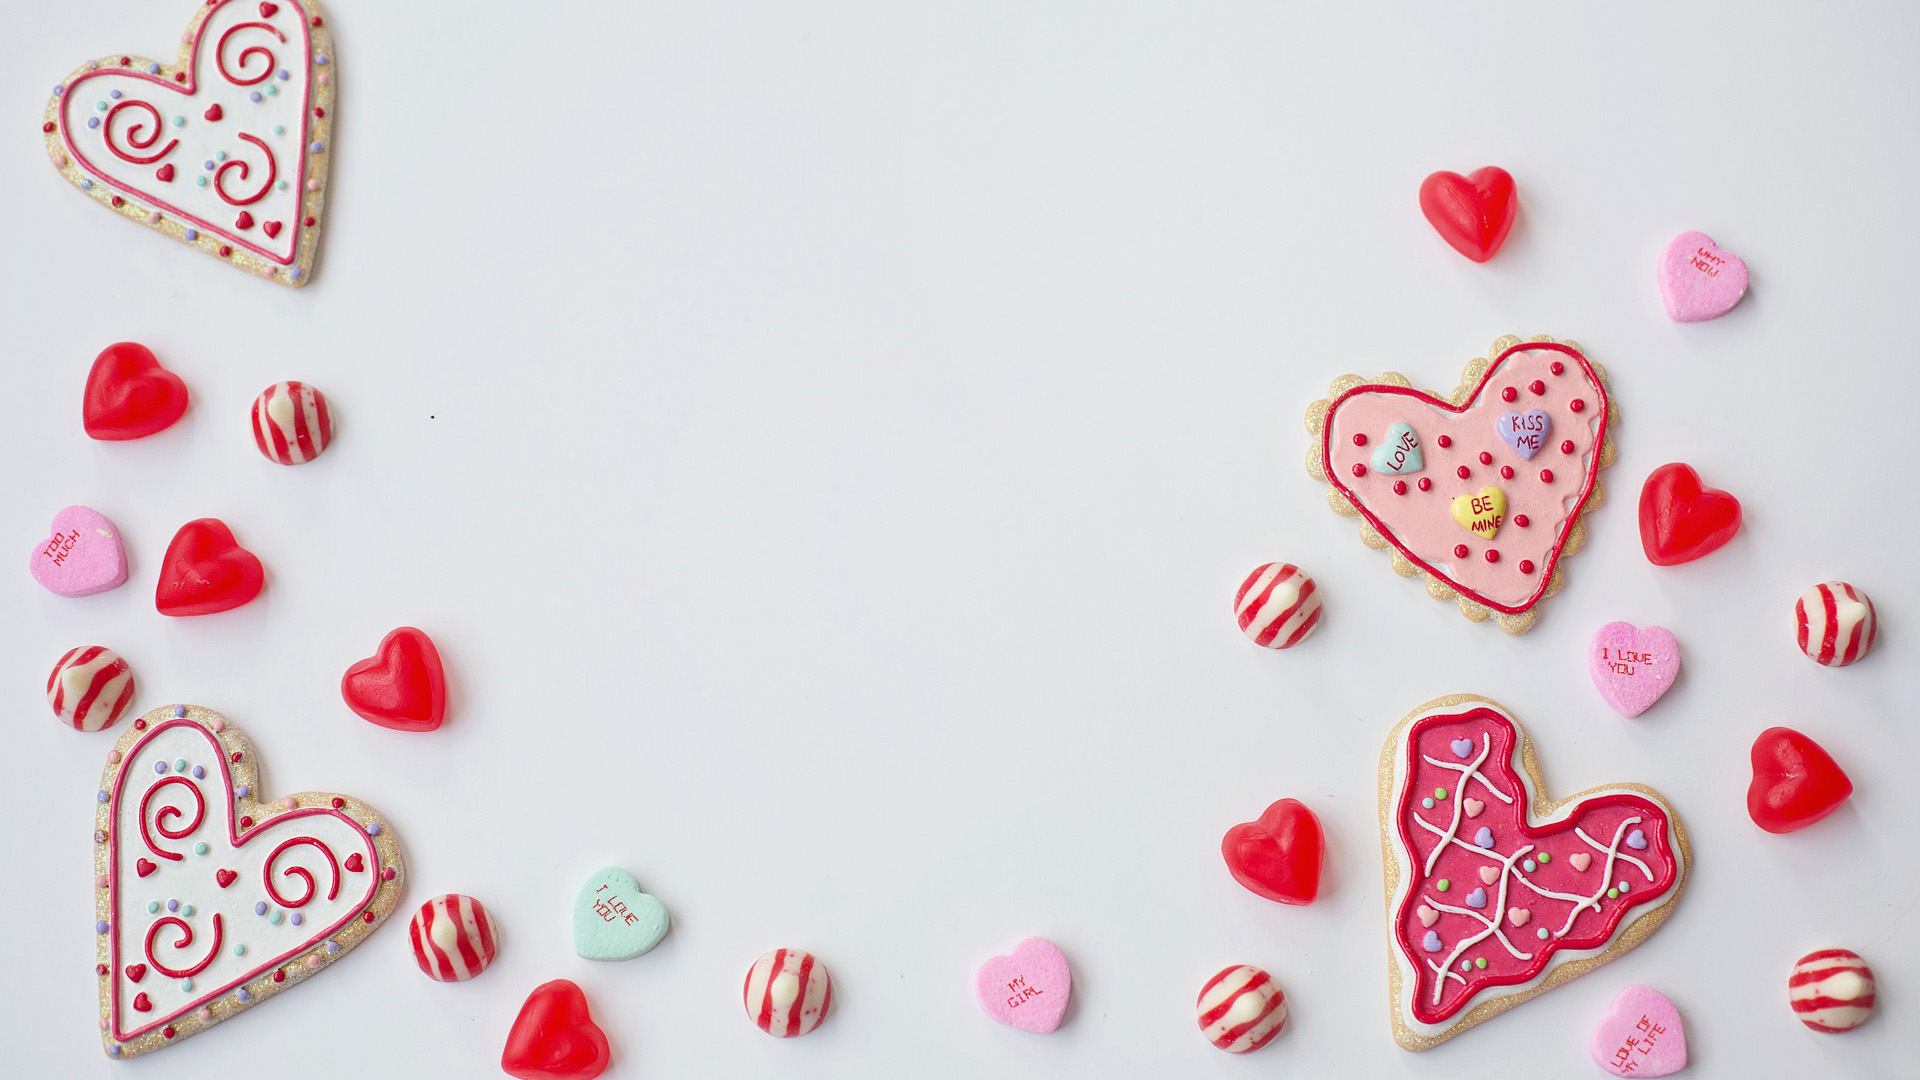 White background with frosted heart shaped cookies. Other candies like red and white kisses, red hard candy hearts, and sugar message hearts, are dispersed across the bottom and left and right side of the graphic.